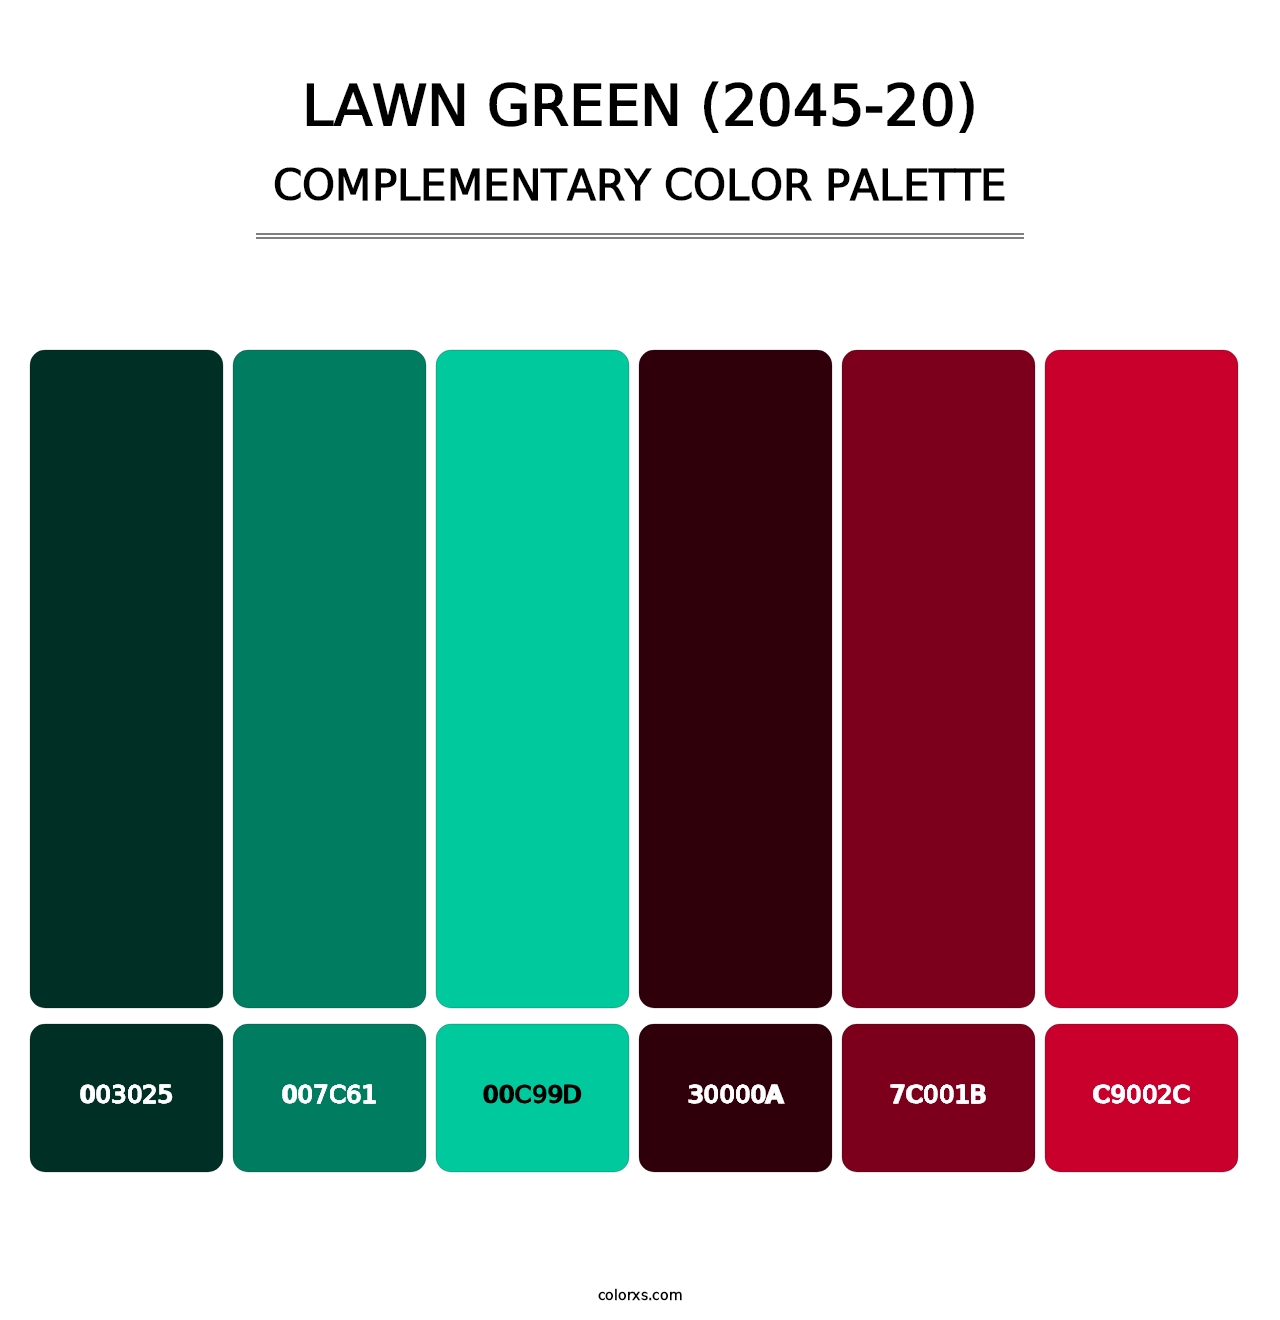 Lawn Green (2045-20) - Complementary Color Palette